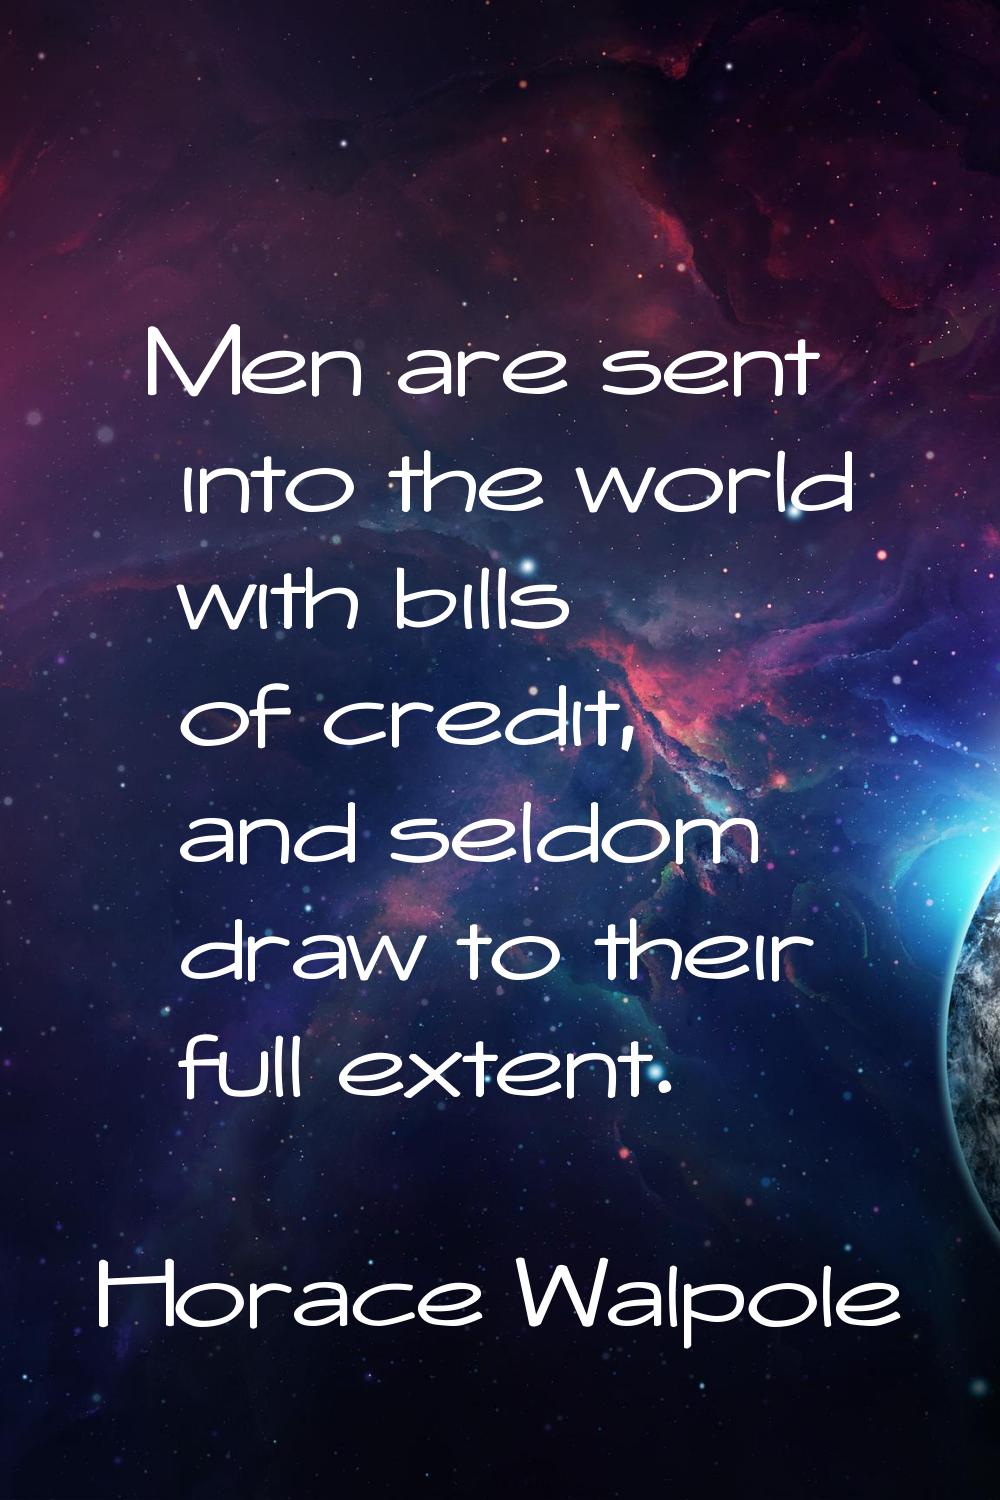 Men are sent into the world with bills of credit, and seldom draw to their full extent.